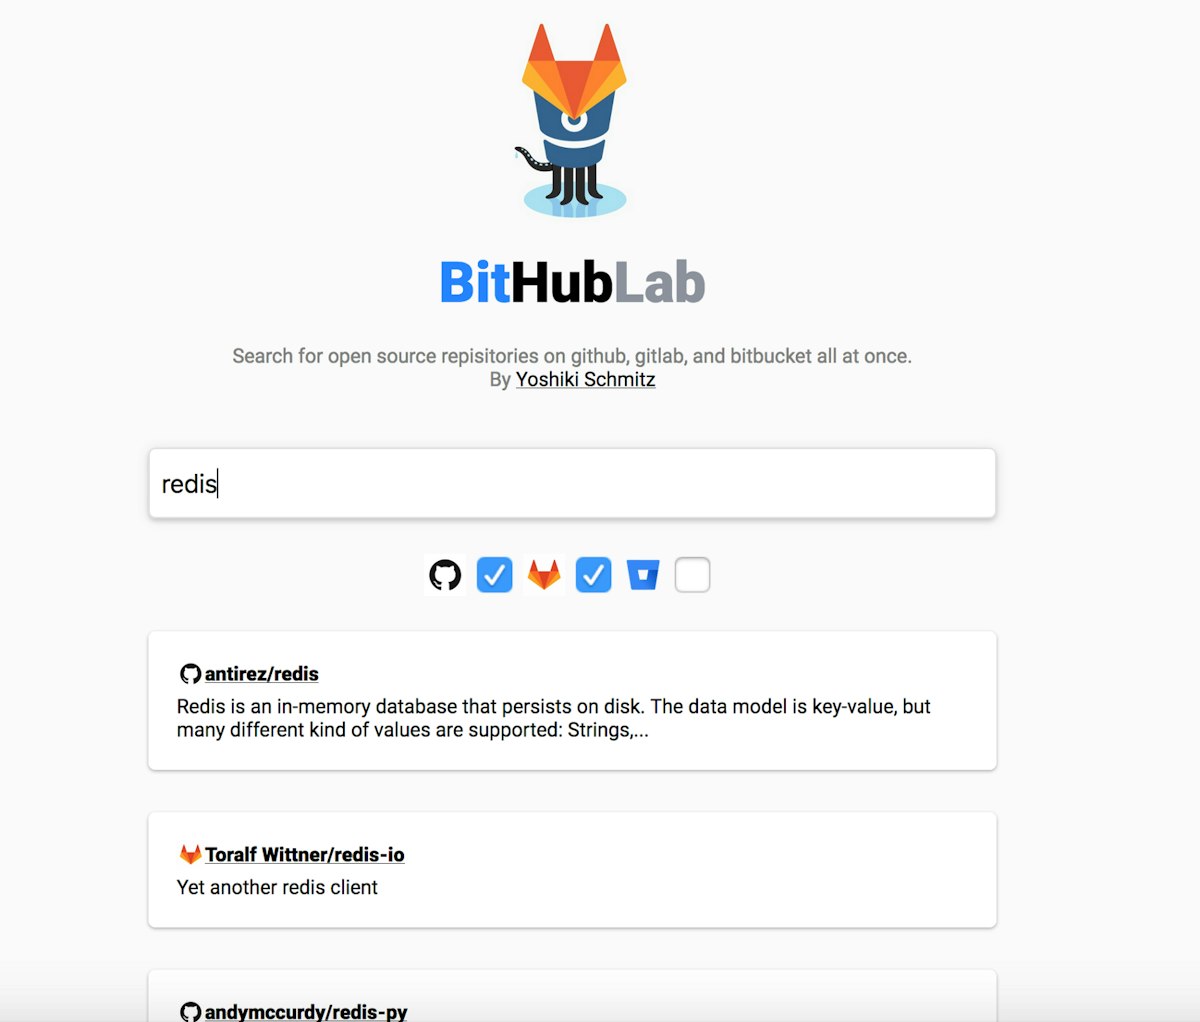 featured image - Lessons Learned From Getting Bithublab To The Front Page of Hacker News